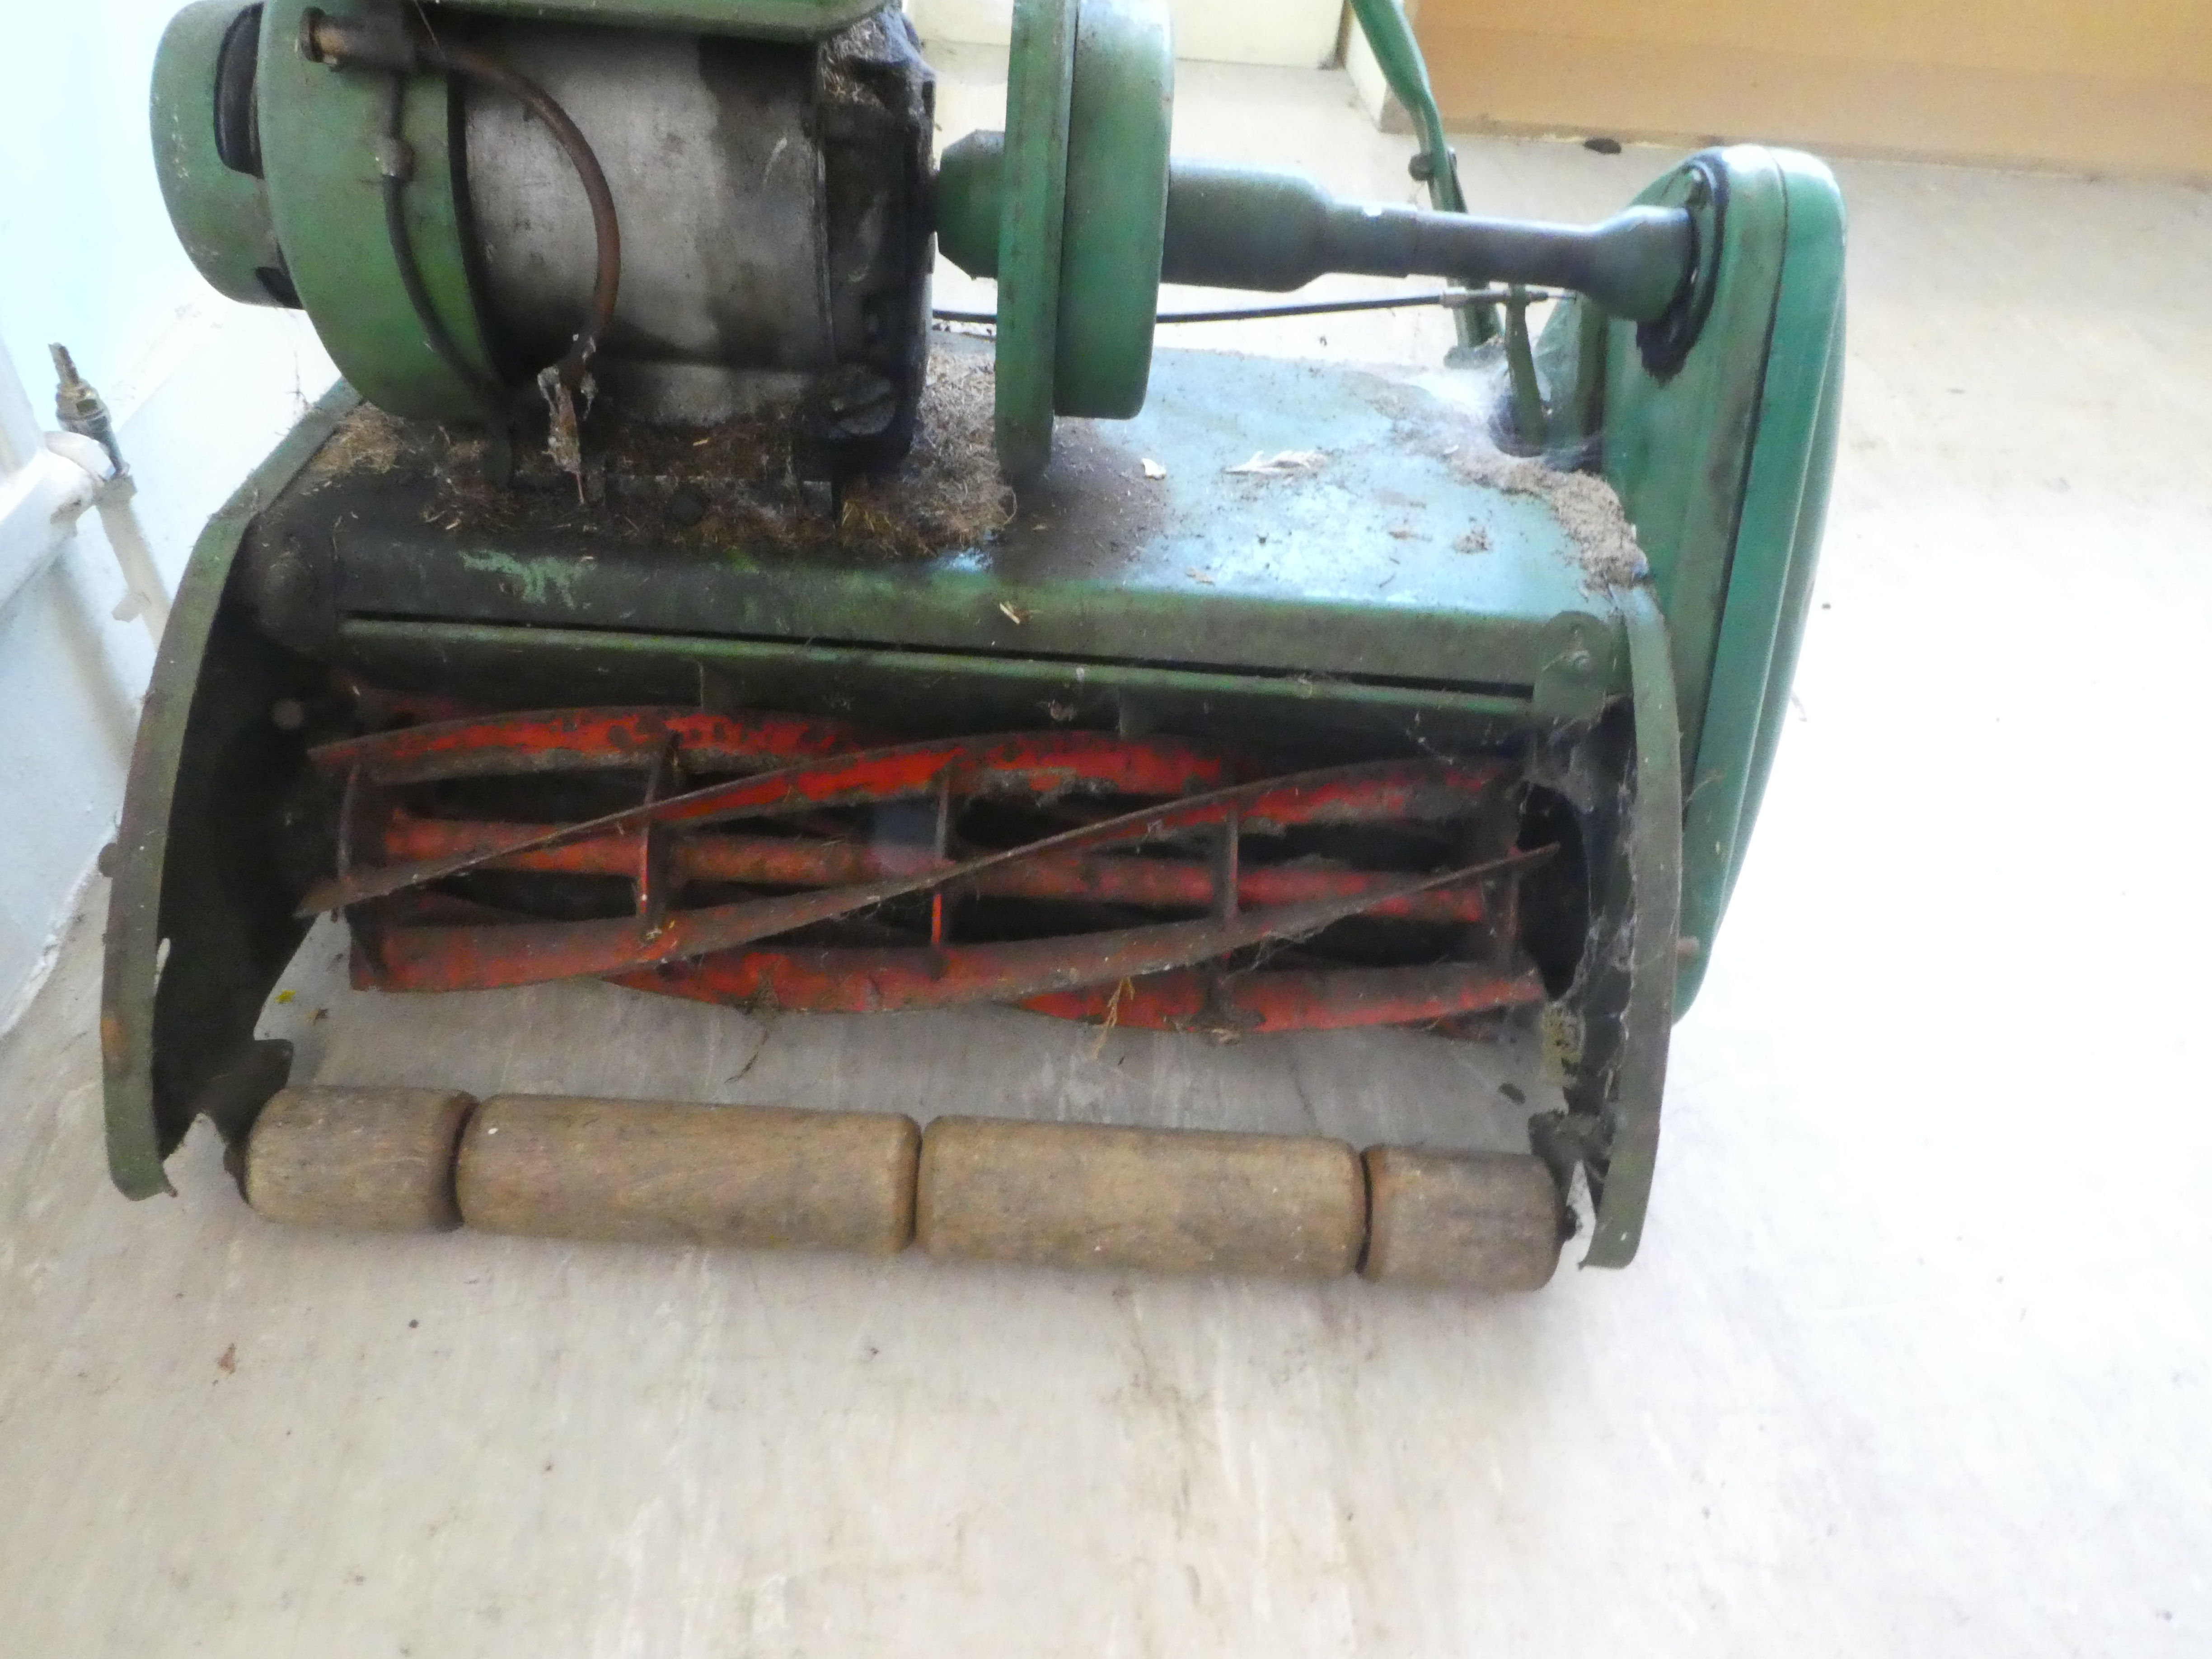 A vintage petrol driven cylindrical lawn mower with a grass box - Image 4 of 6